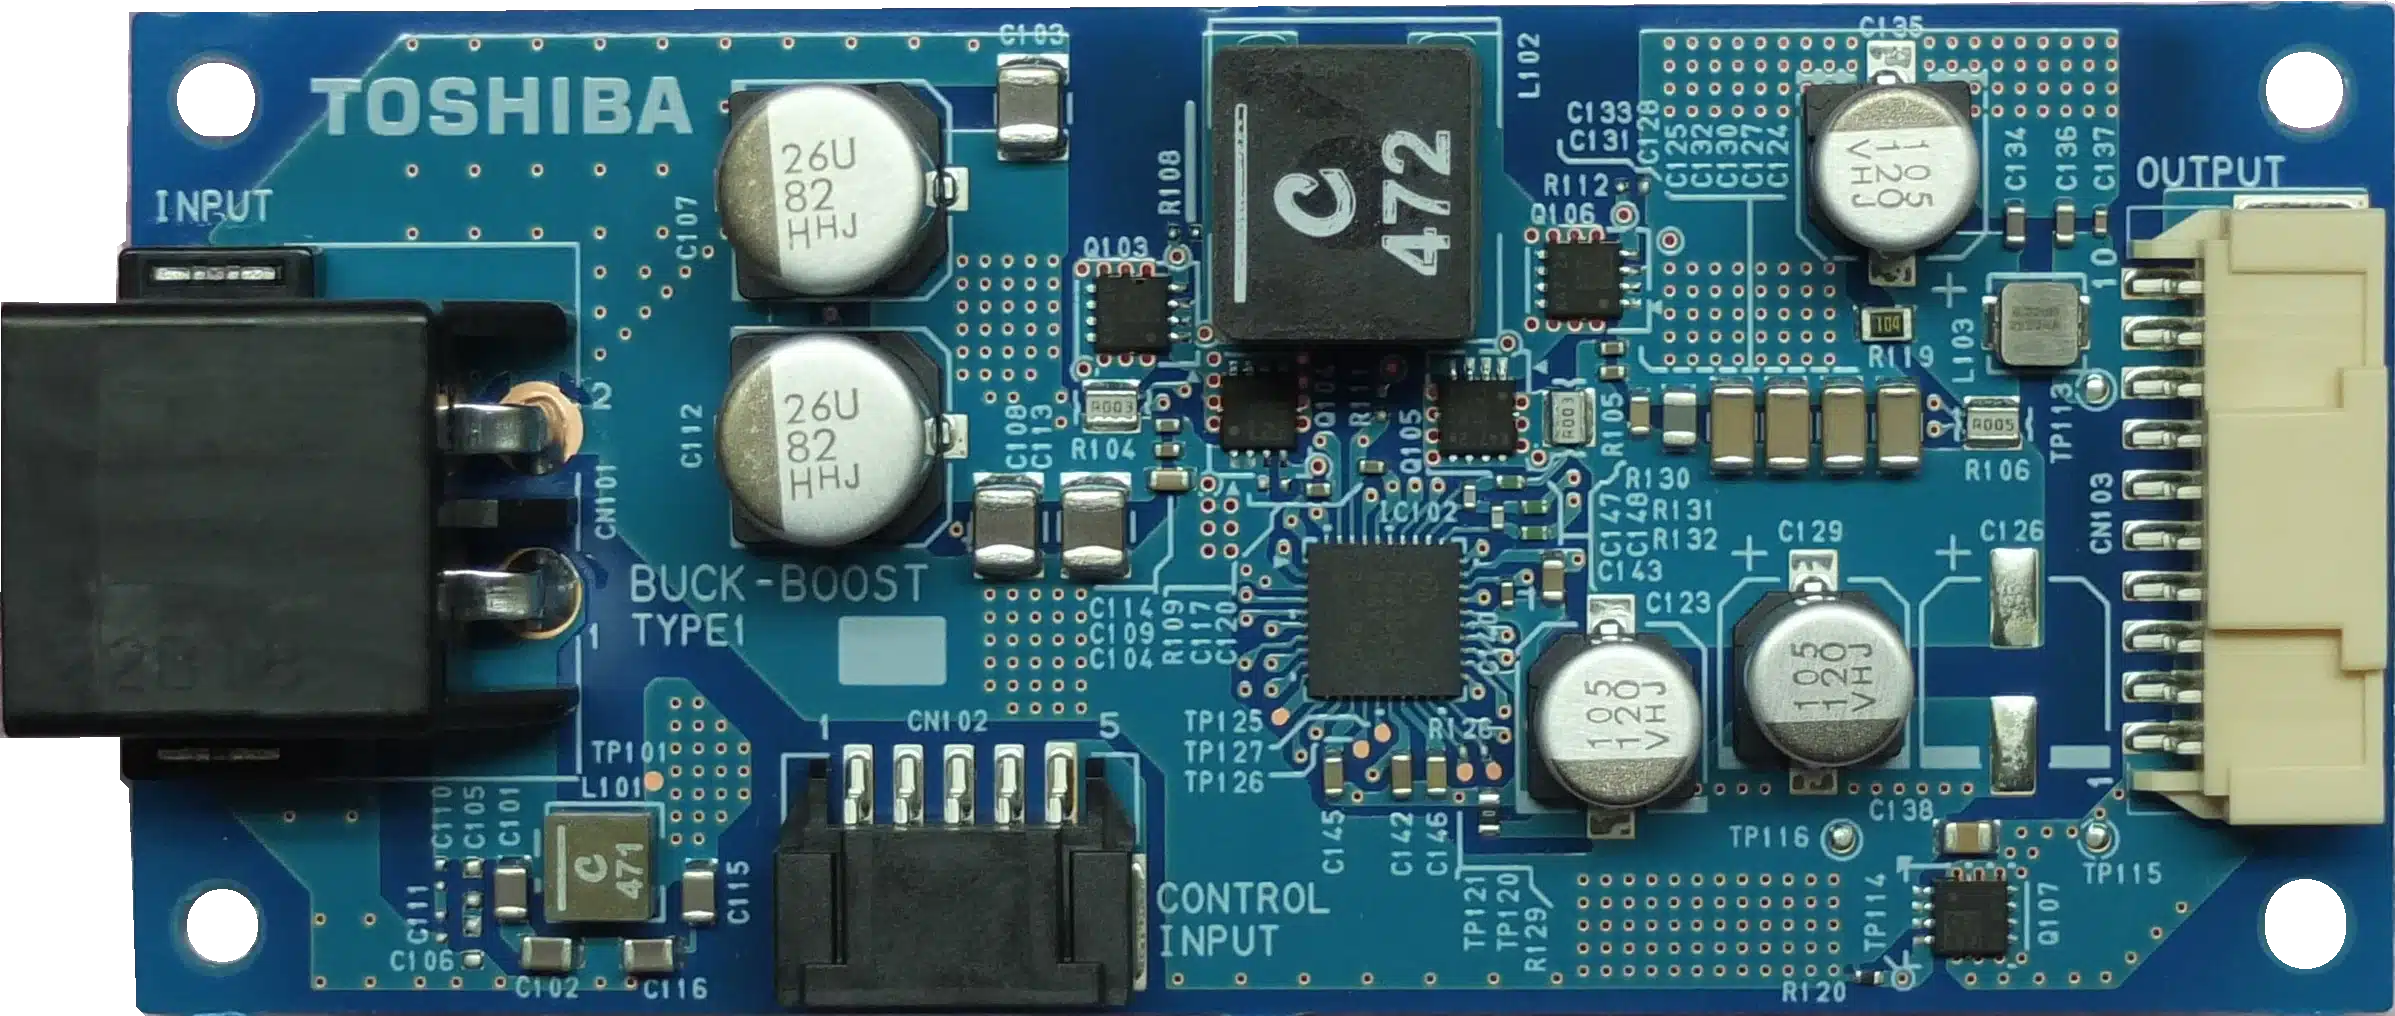 Automotive Buck-Boost DC-DC Converter Reference Design For USB PD